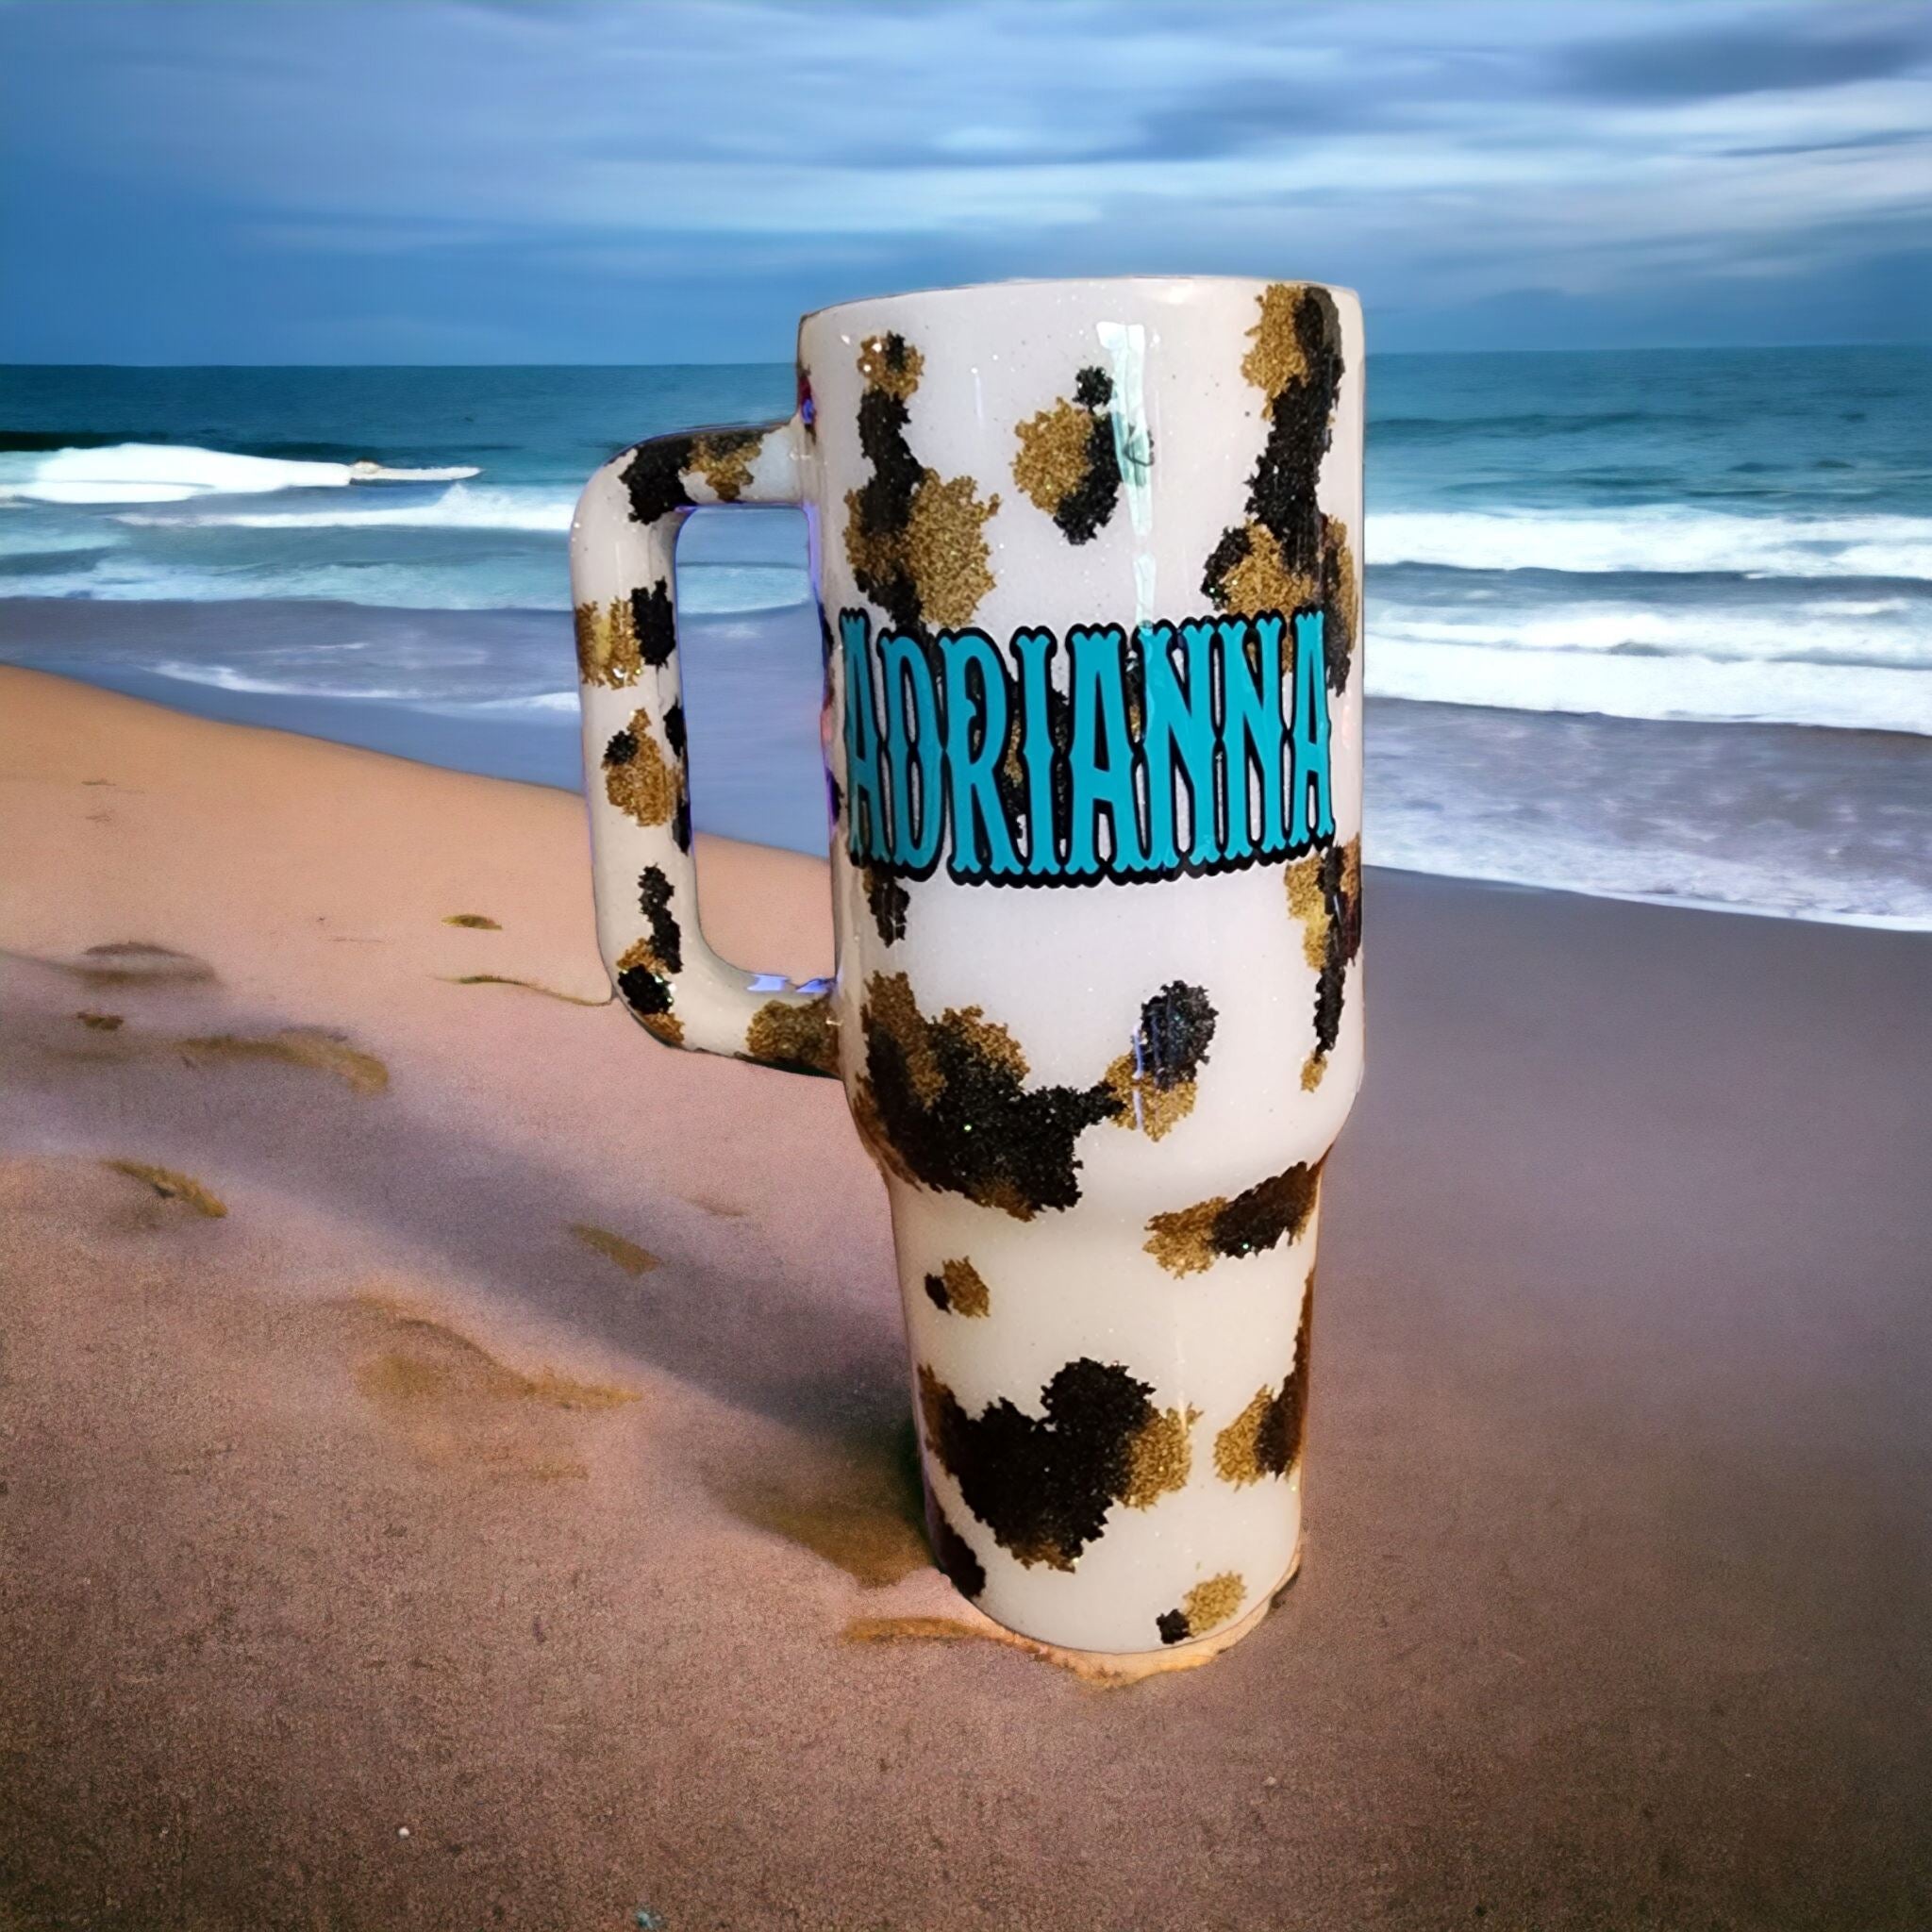 40oz Cow Tumbler With Handle,Cow Print Gifts for Women,Cow Print